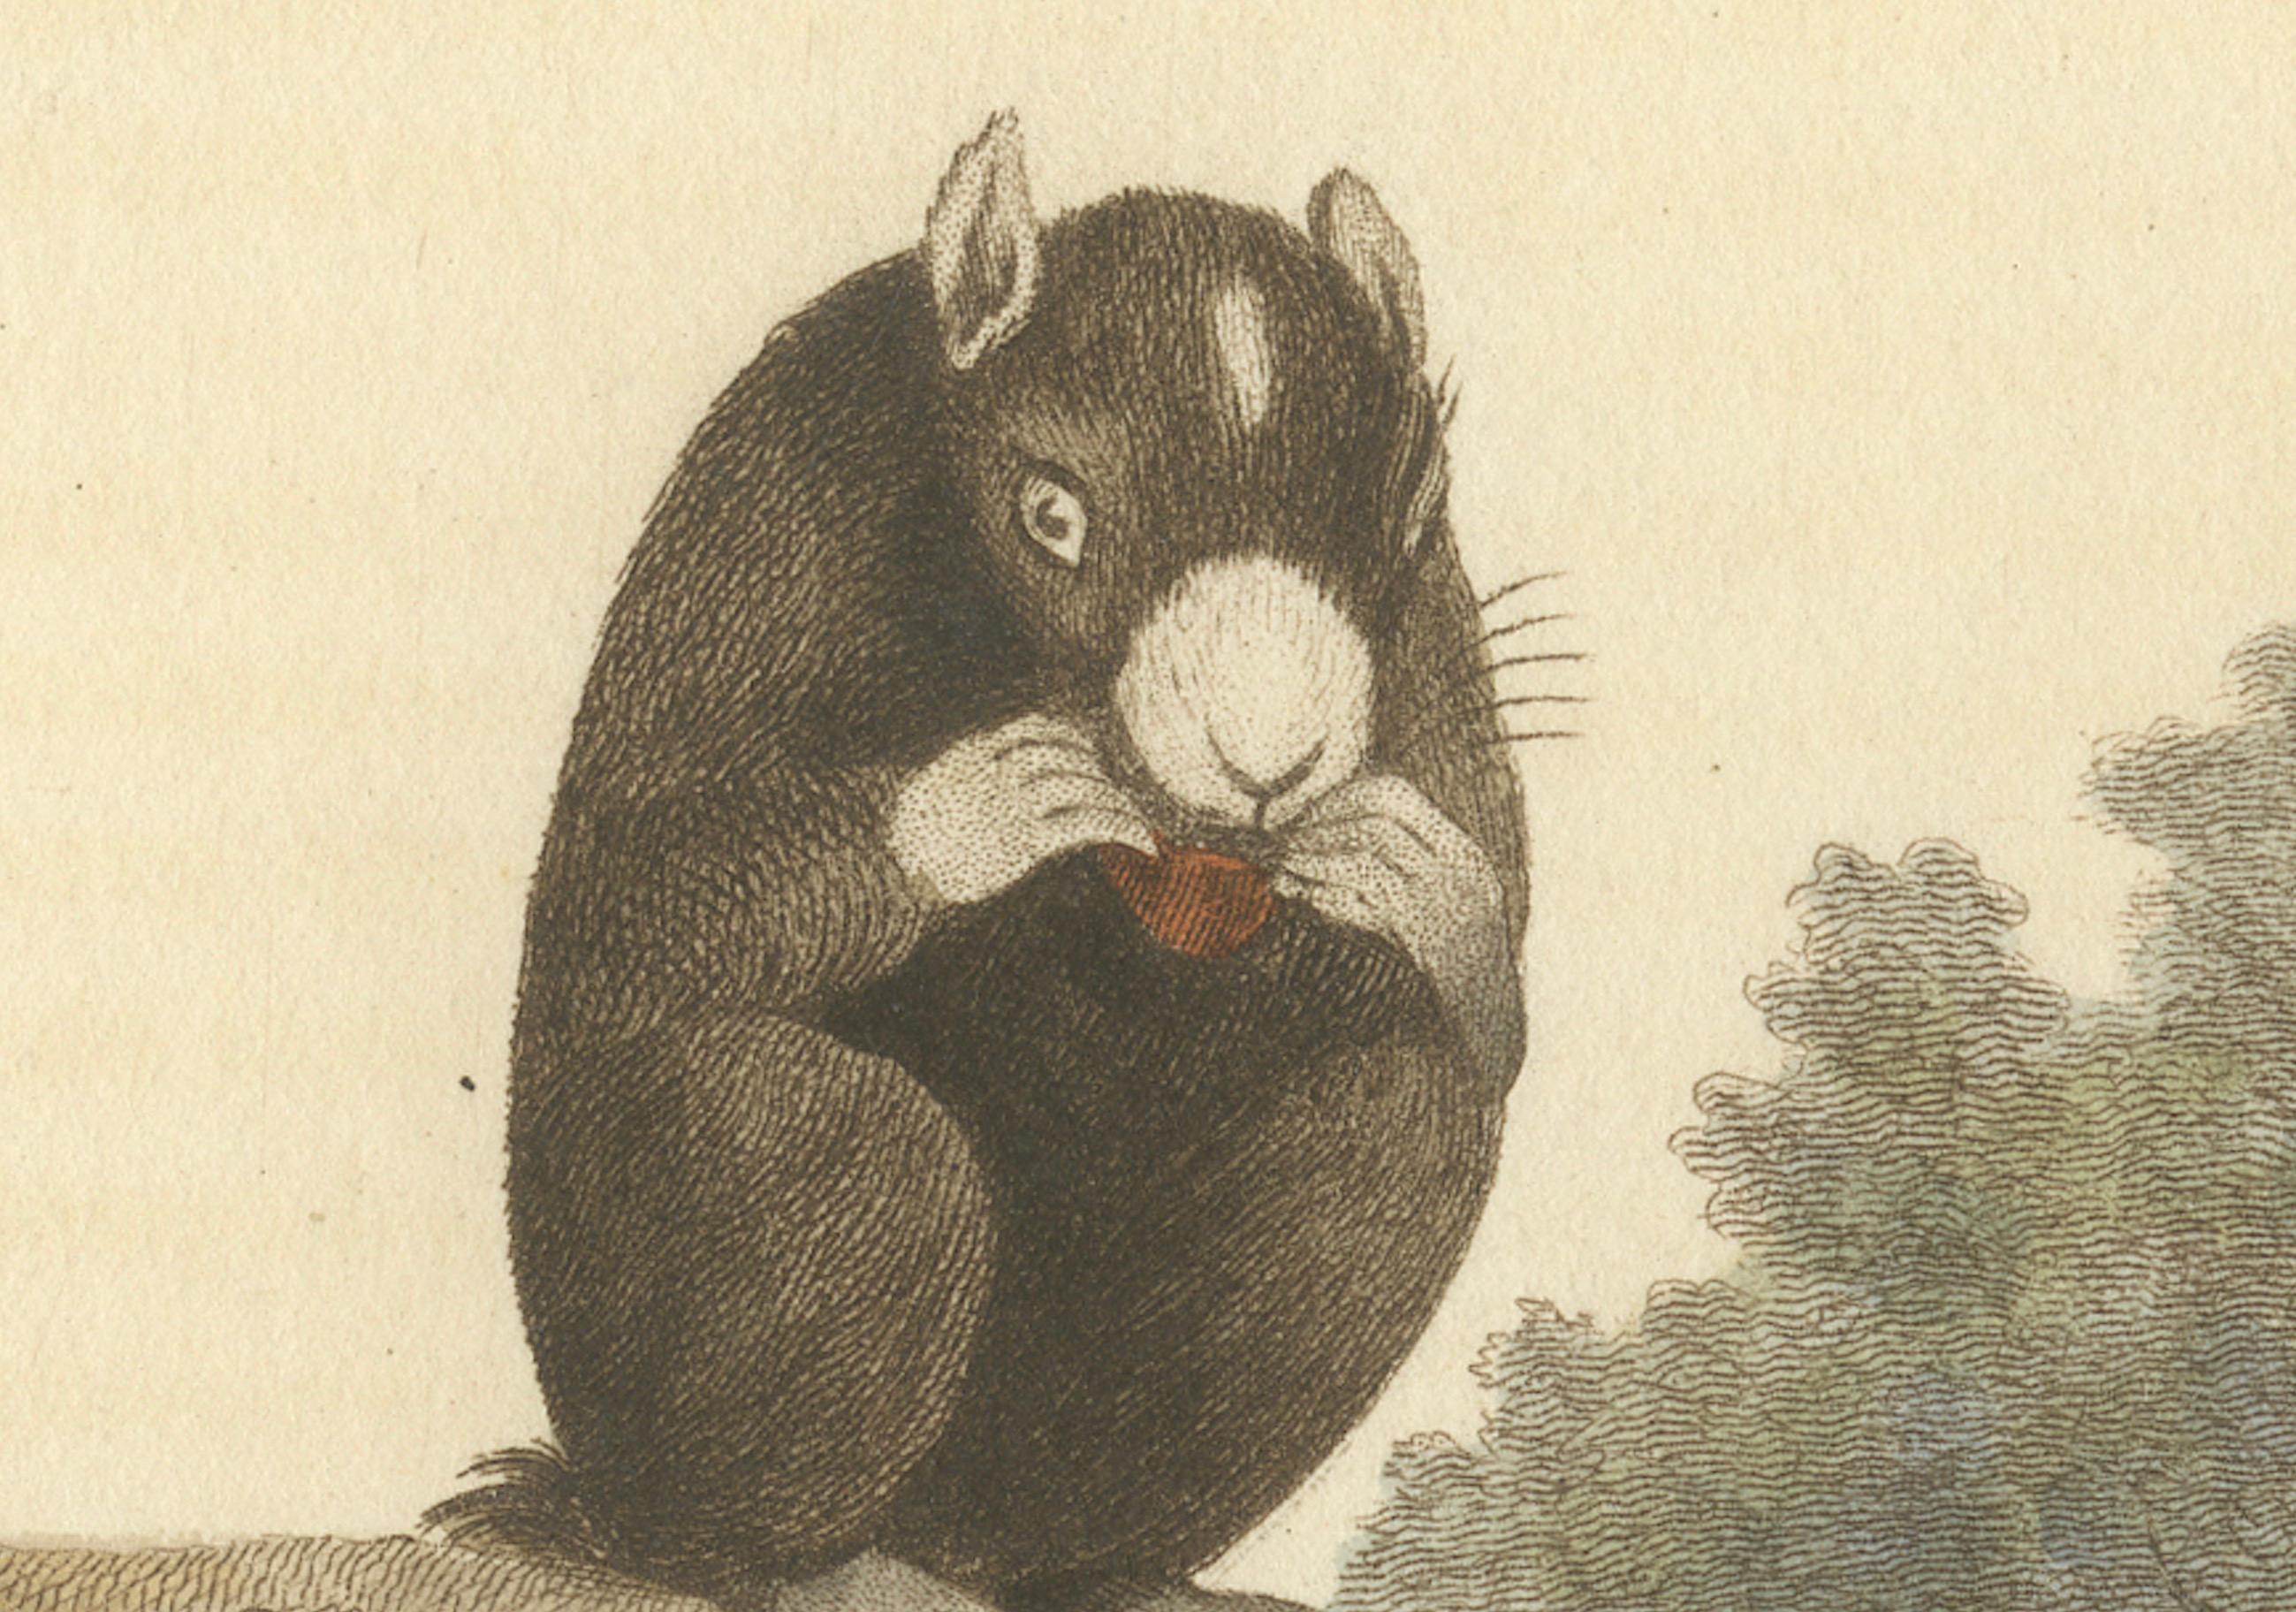 The original image is a historical print of masked squirrels, titled 'The muzzled or masked squirrel, S. Capistratus'. If it was published by G.B. Whittaker based on an illustration by Charles Hamilton Smith circa 1824, and part of a collection that